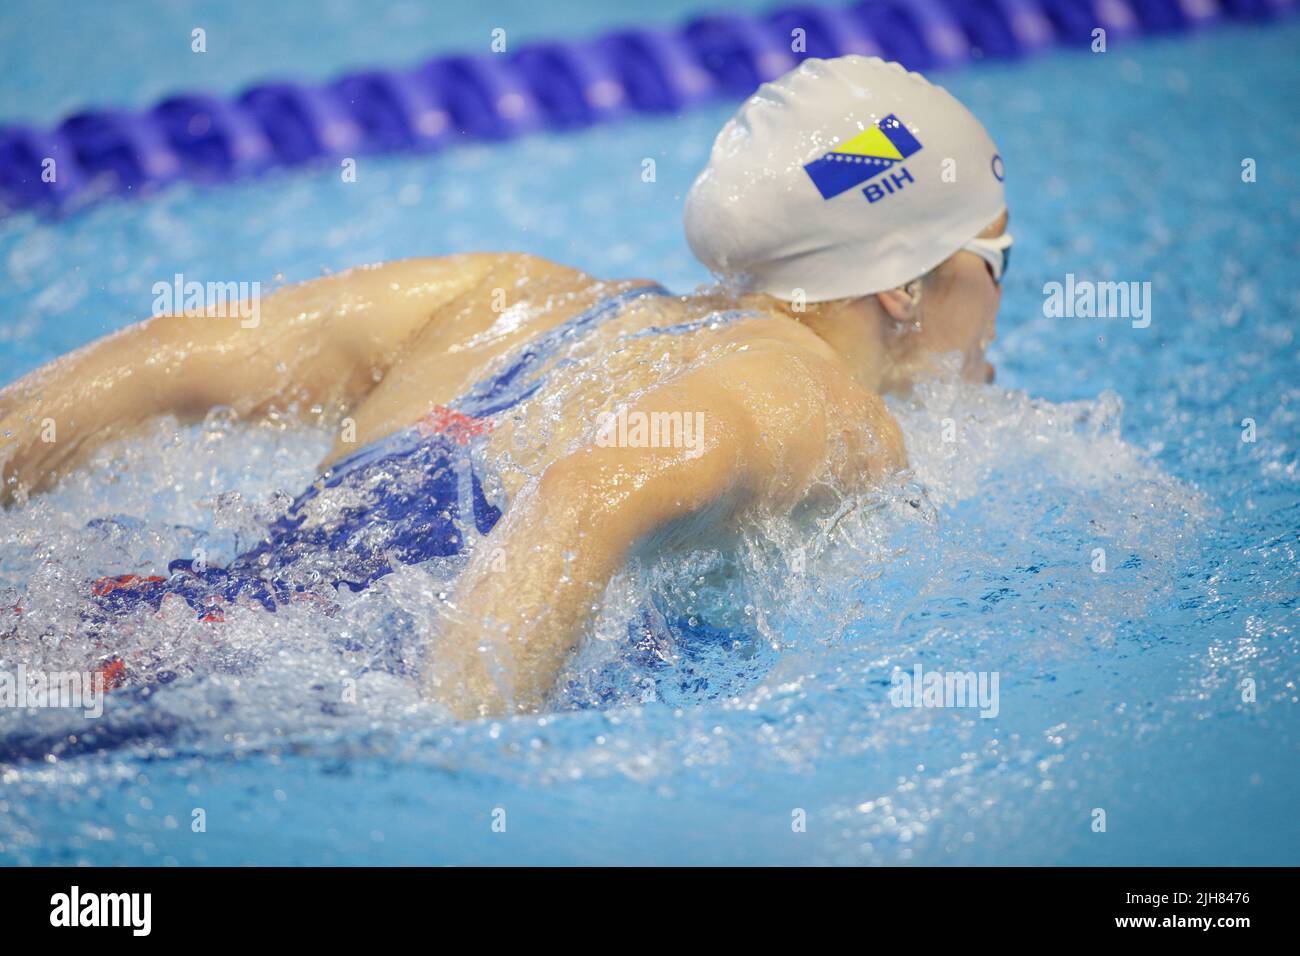 Otopeni, Romania - 8 July 2022: Details with a professional Israeli  female athlete swimming in an olympic swimming pool butterfly style. female athle Stock Photo